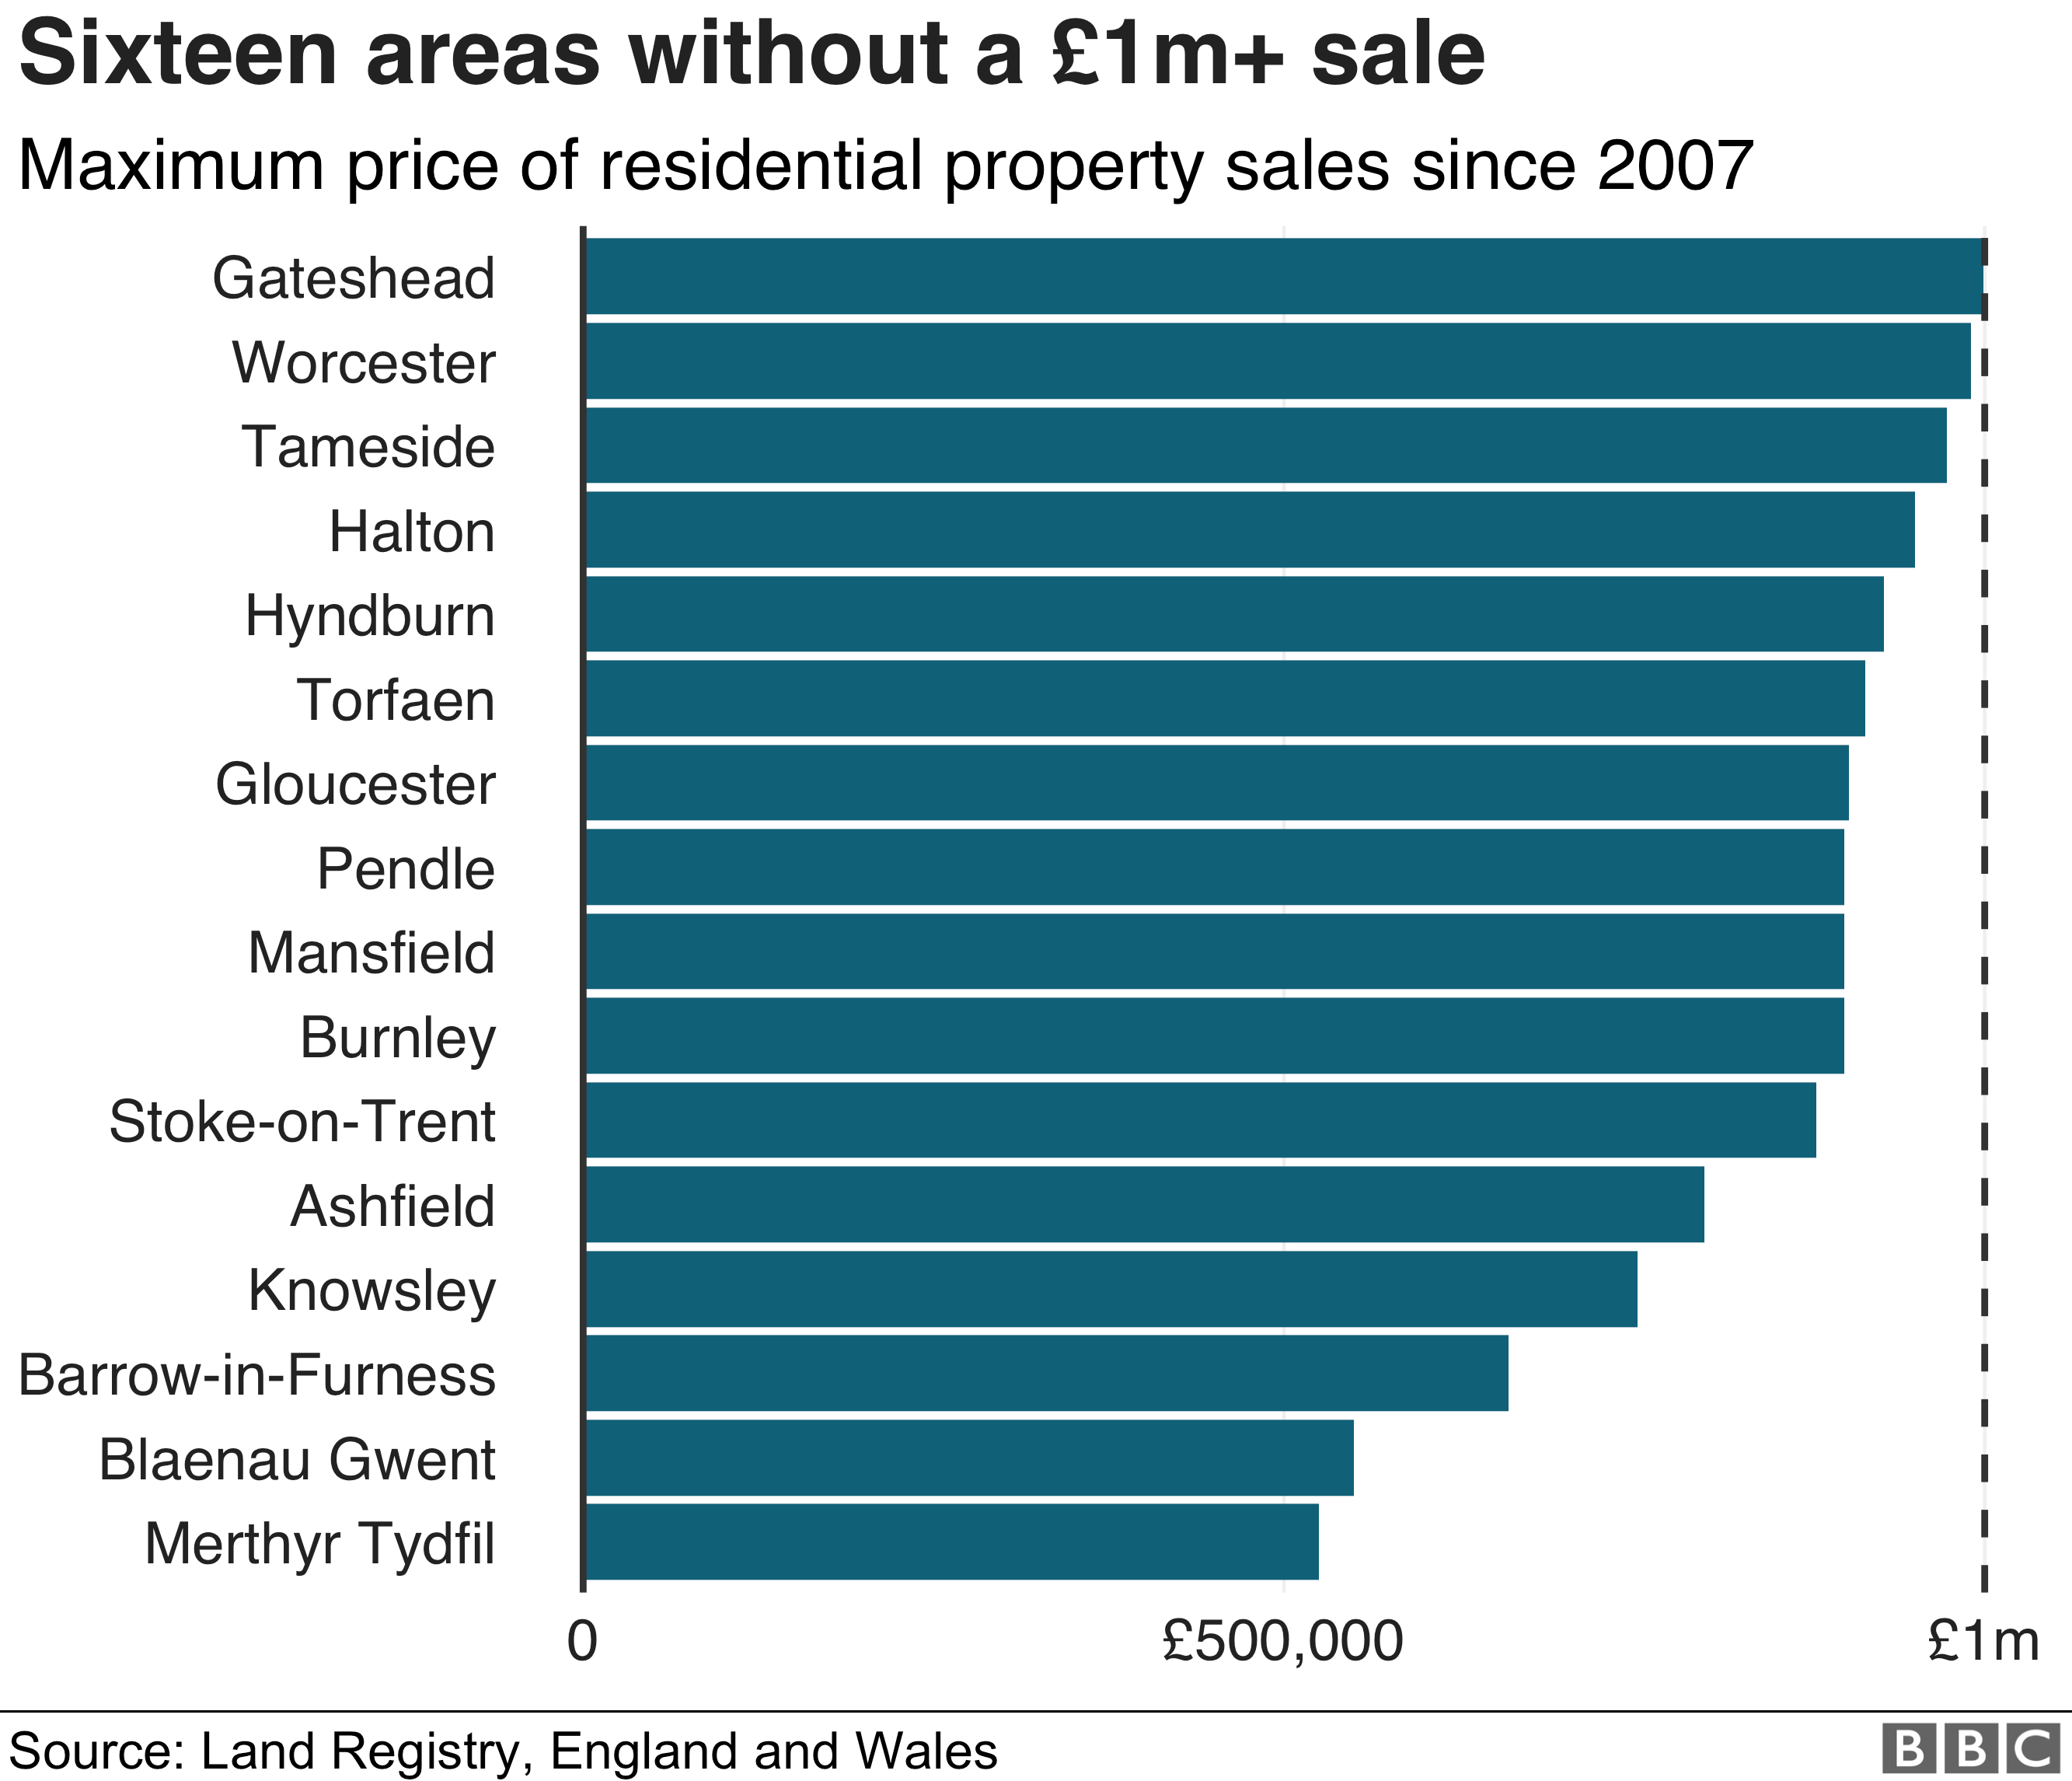 Areas in which there have been no £1m plus property sales since 2007 in graphic, and top prices in those areas